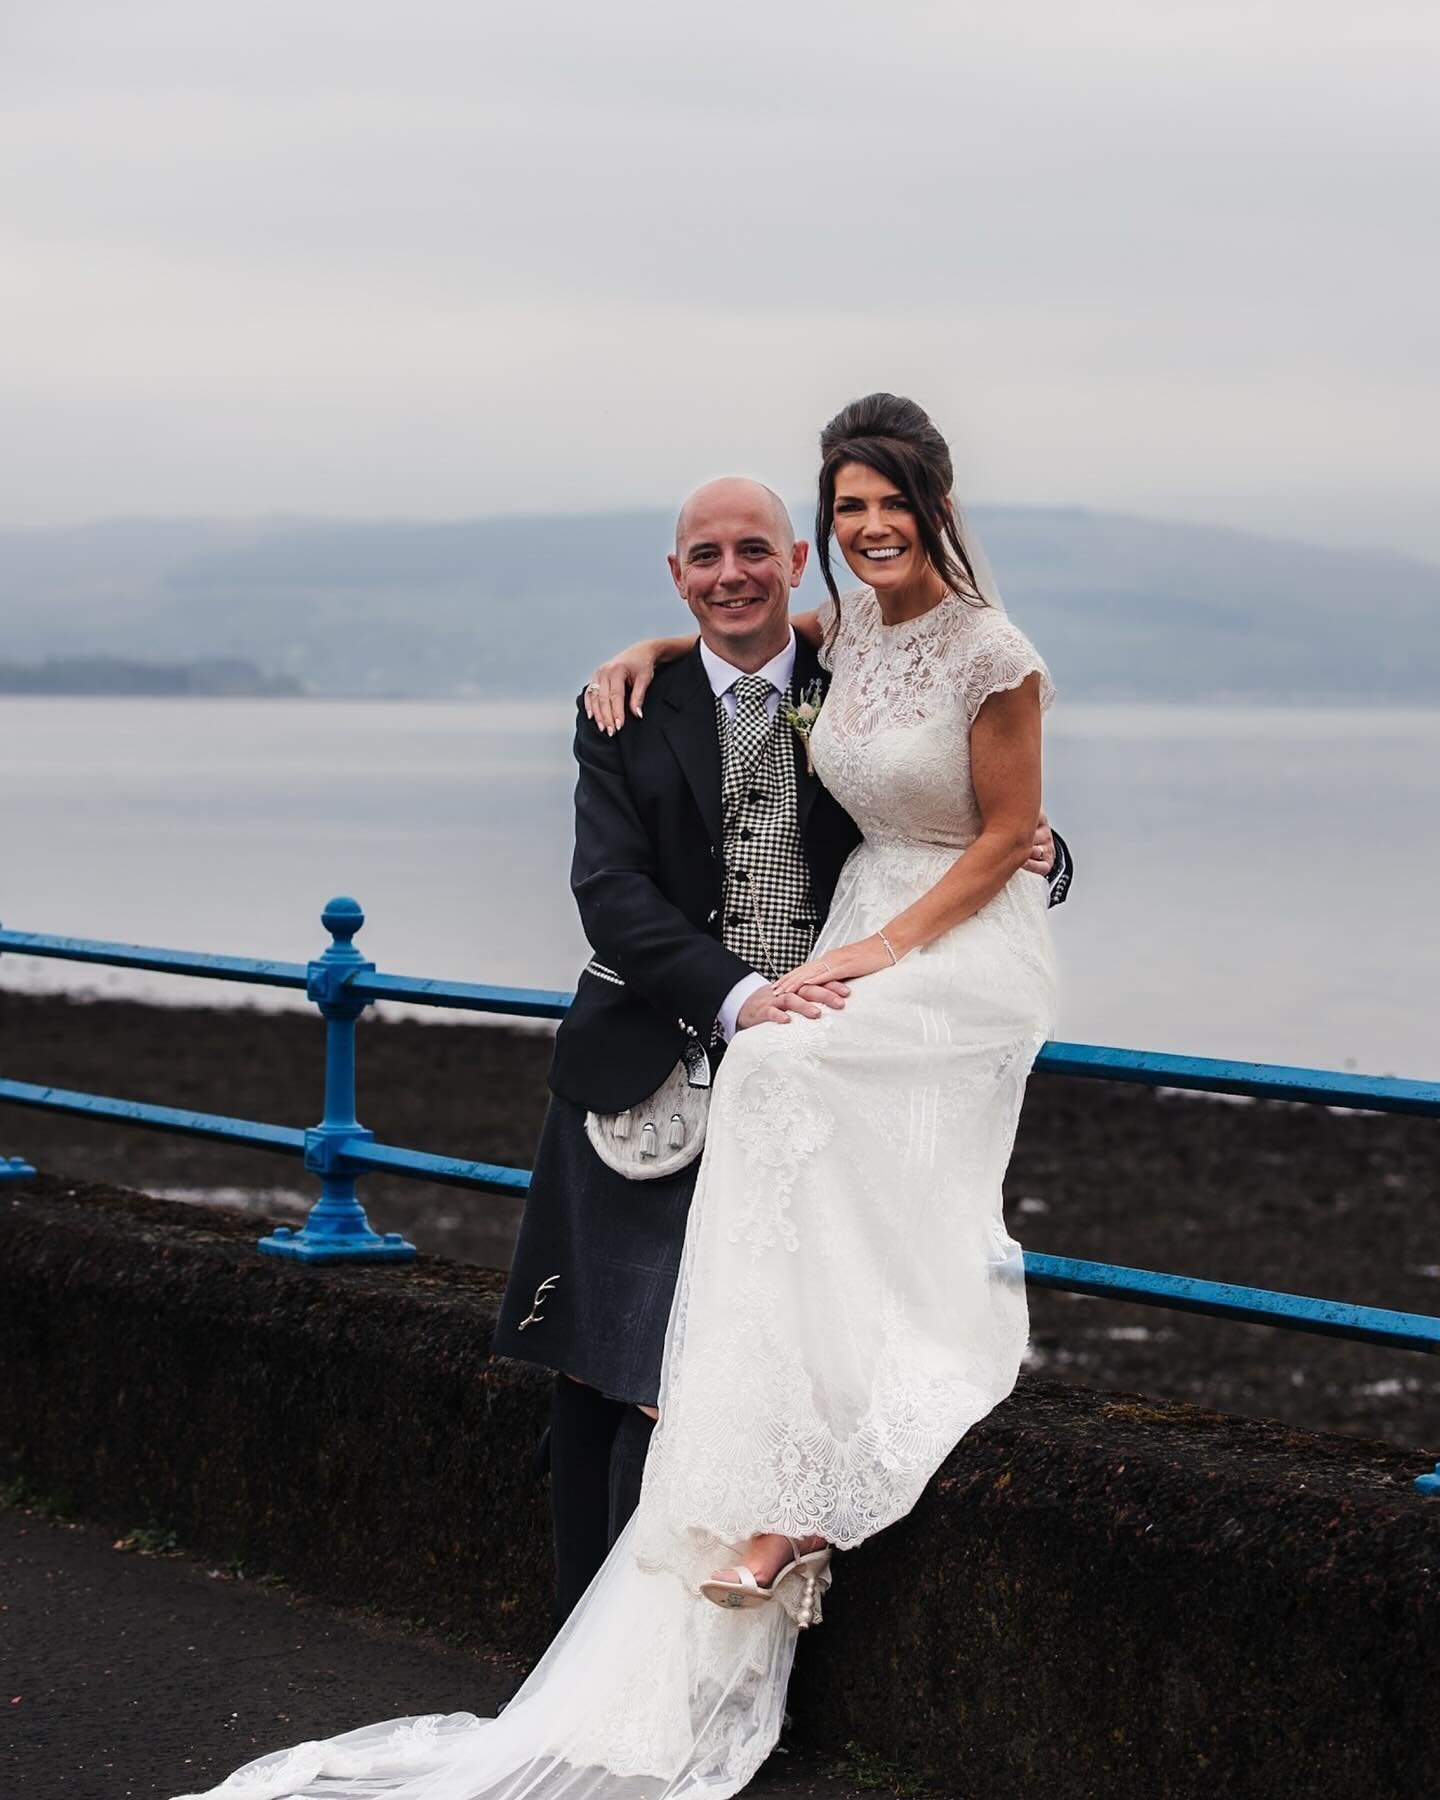 Huge congrats to Kirsty and Gary, who were married just over a week ago at @the_albany in sunny Greenock. 

Fantastic day!

K and G&rsquo;s wedding team:

Me 📸
My man @lspix 
Content Creator : @yourdayunplugged 
Make Up: @glam_bypaula 
Hair @thelab_